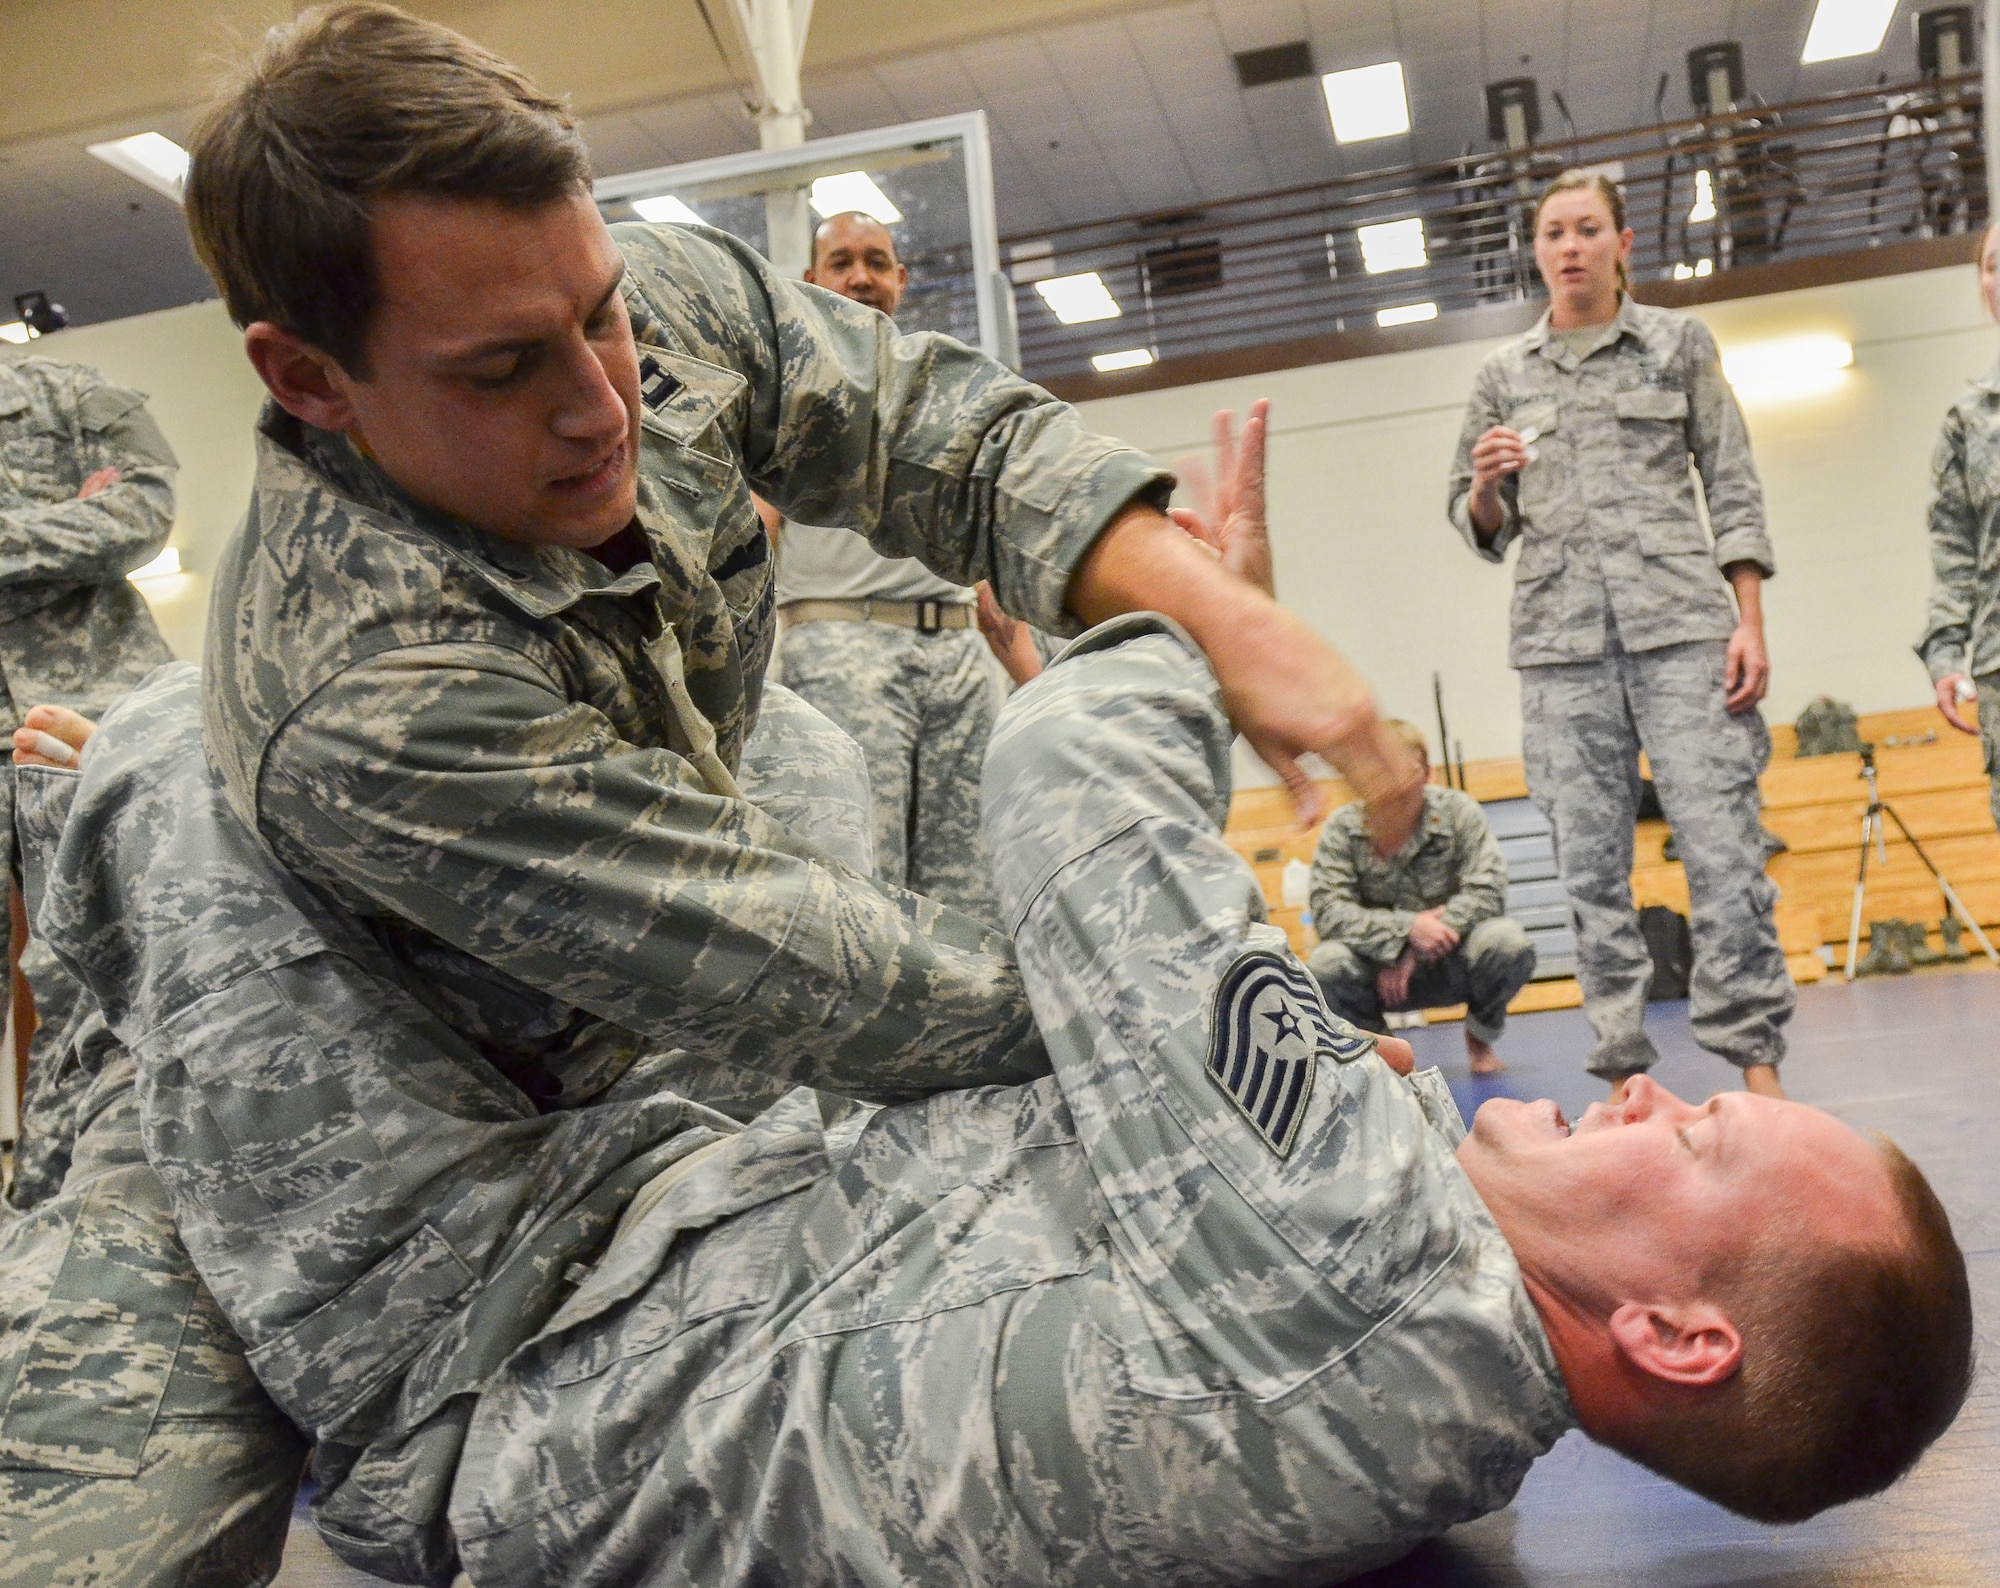 Capt. Brian Dicks, 55th Rescue Squadron, attempts a submission on Tech Sgt. Joshua Holliday, 612th Air and Space Operations Center, during the Modern Army Combatives Program (MACP) Basic Combatives Course Level 1 at Davis-Monthan Air Force Base, Ariz., Jan. 16, 2014. The 40-hour course focuses on the three phases of basic fighting strategy; close the distance, gain the dominate position, and how to finish the fight. (U.S. Air Force photo by Staff Sgt. Adam Grant/Released)